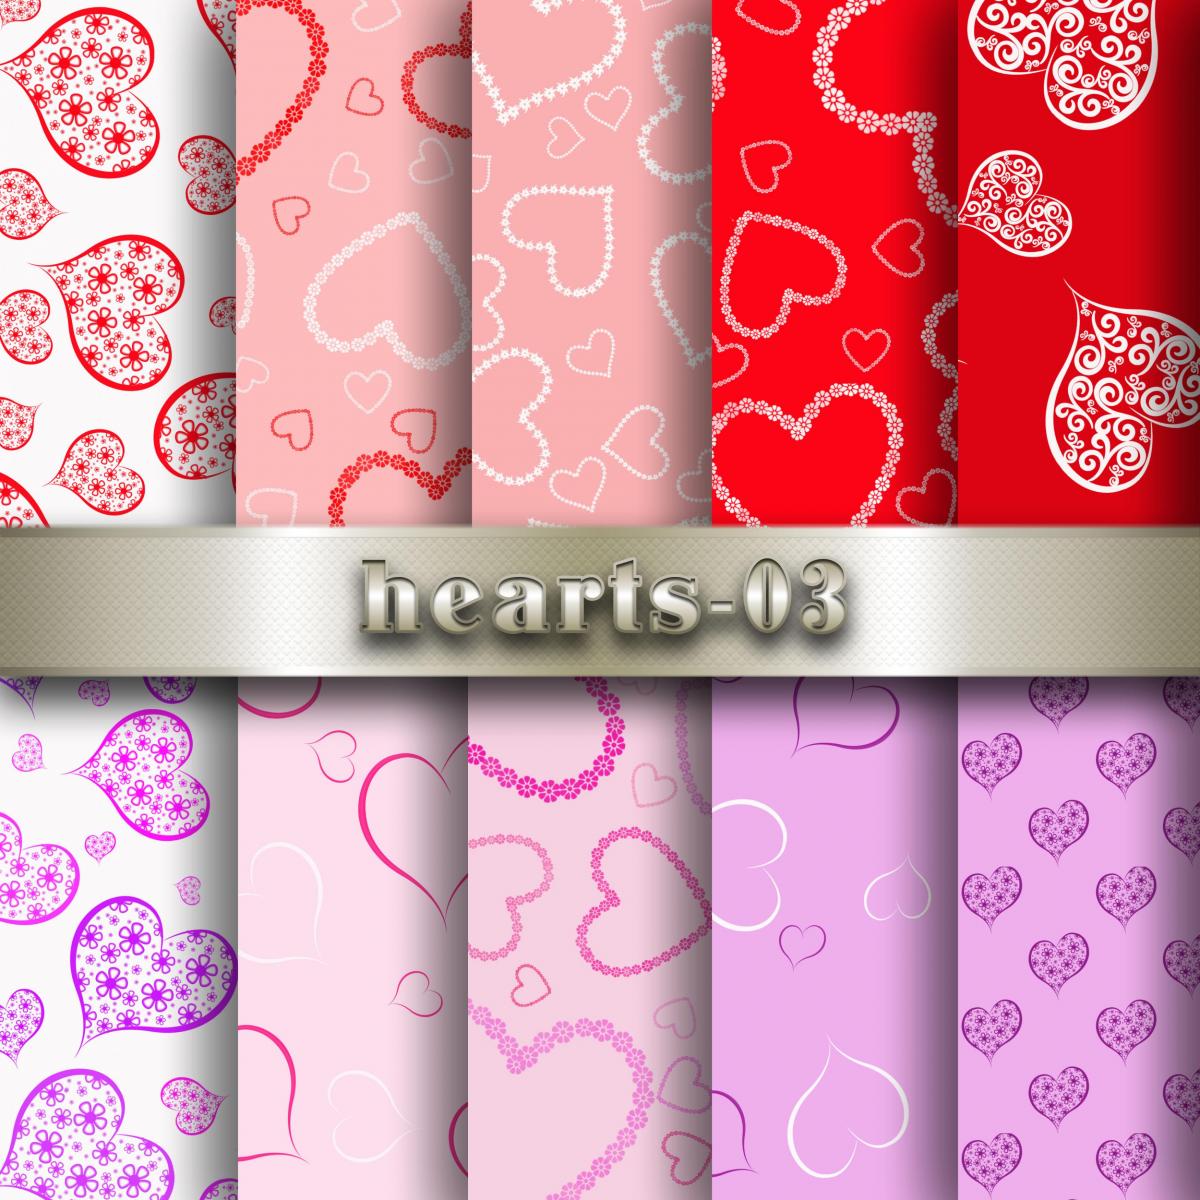 Hearts Digital Scrapbook Papers Background Valentine Love Heart Red-Pink Collection Hearts patterns